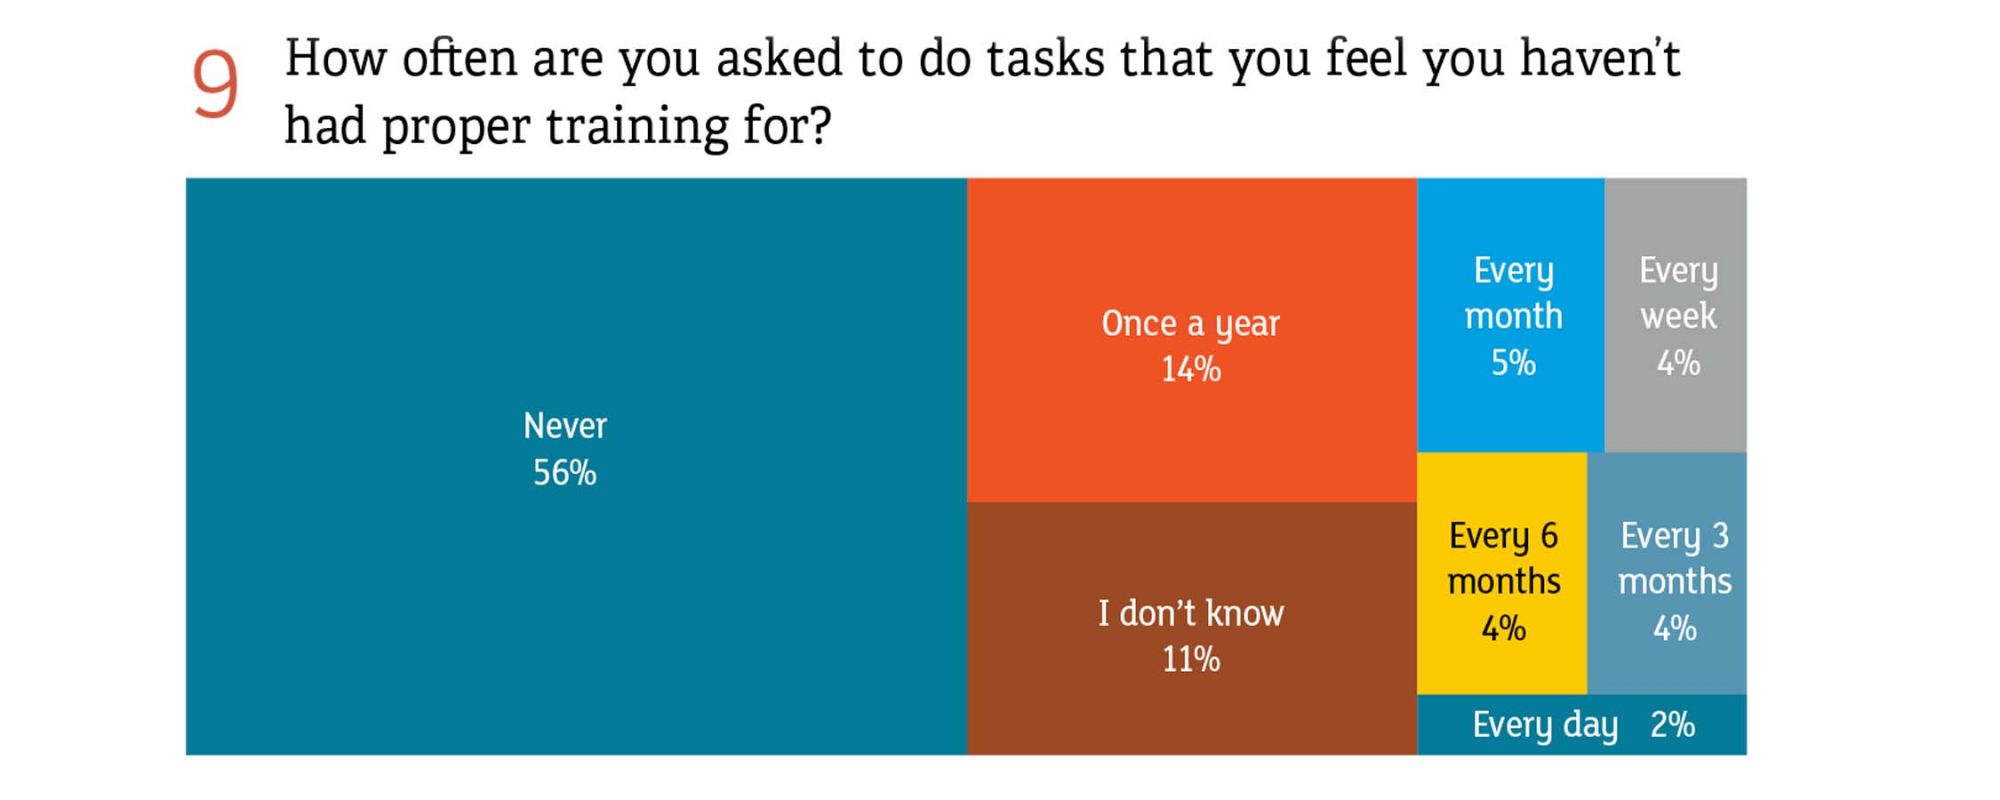 How often are you asked to do task that you feel you hadn't had proper training for?